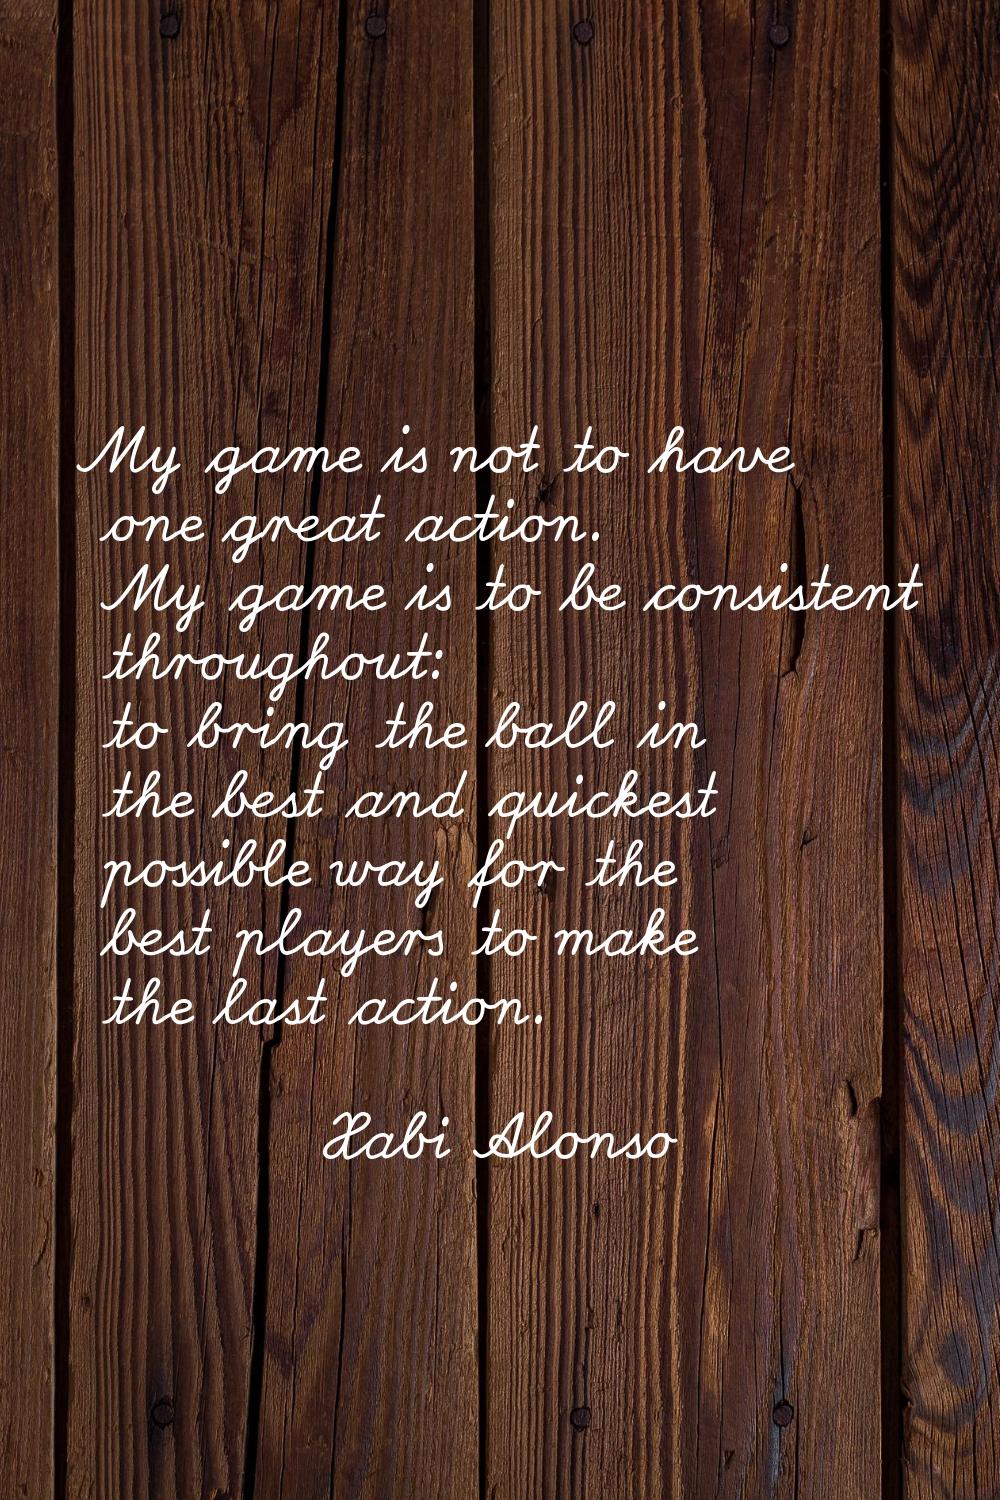 My game is not to have one great action. My game is to be consistent throughout: to bring the ball 